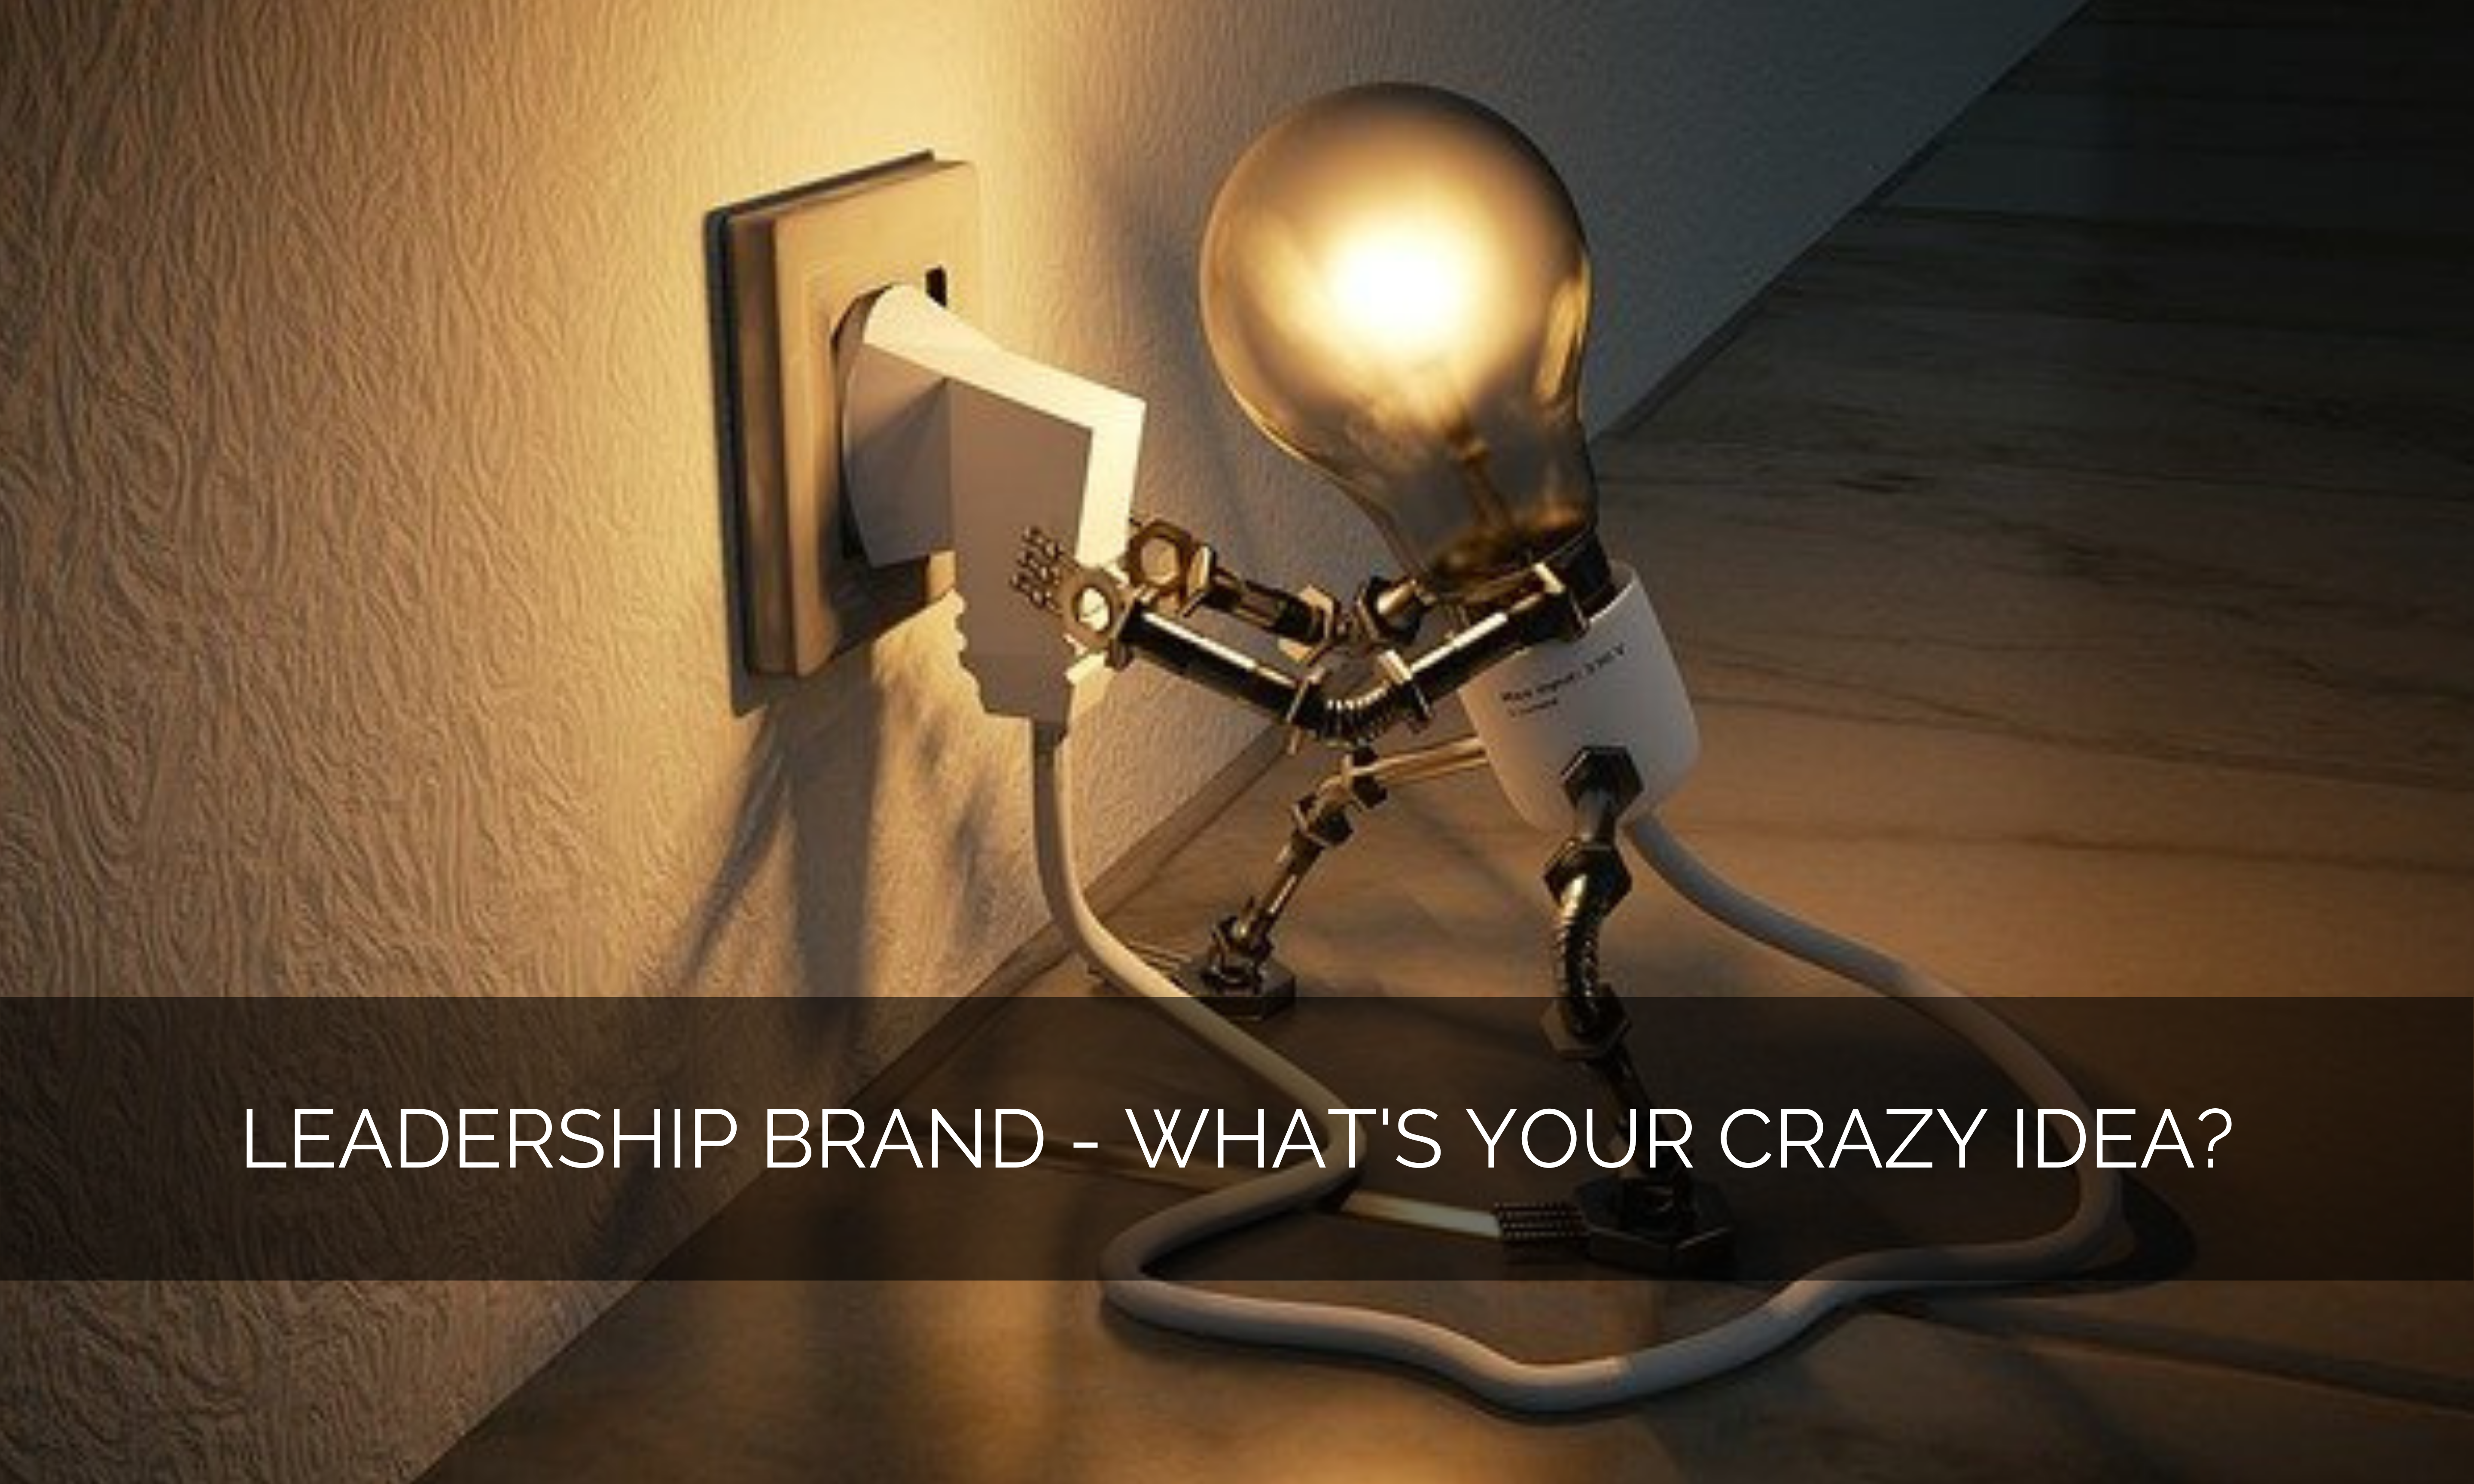 Leadership brand – What’s your crazy idea?